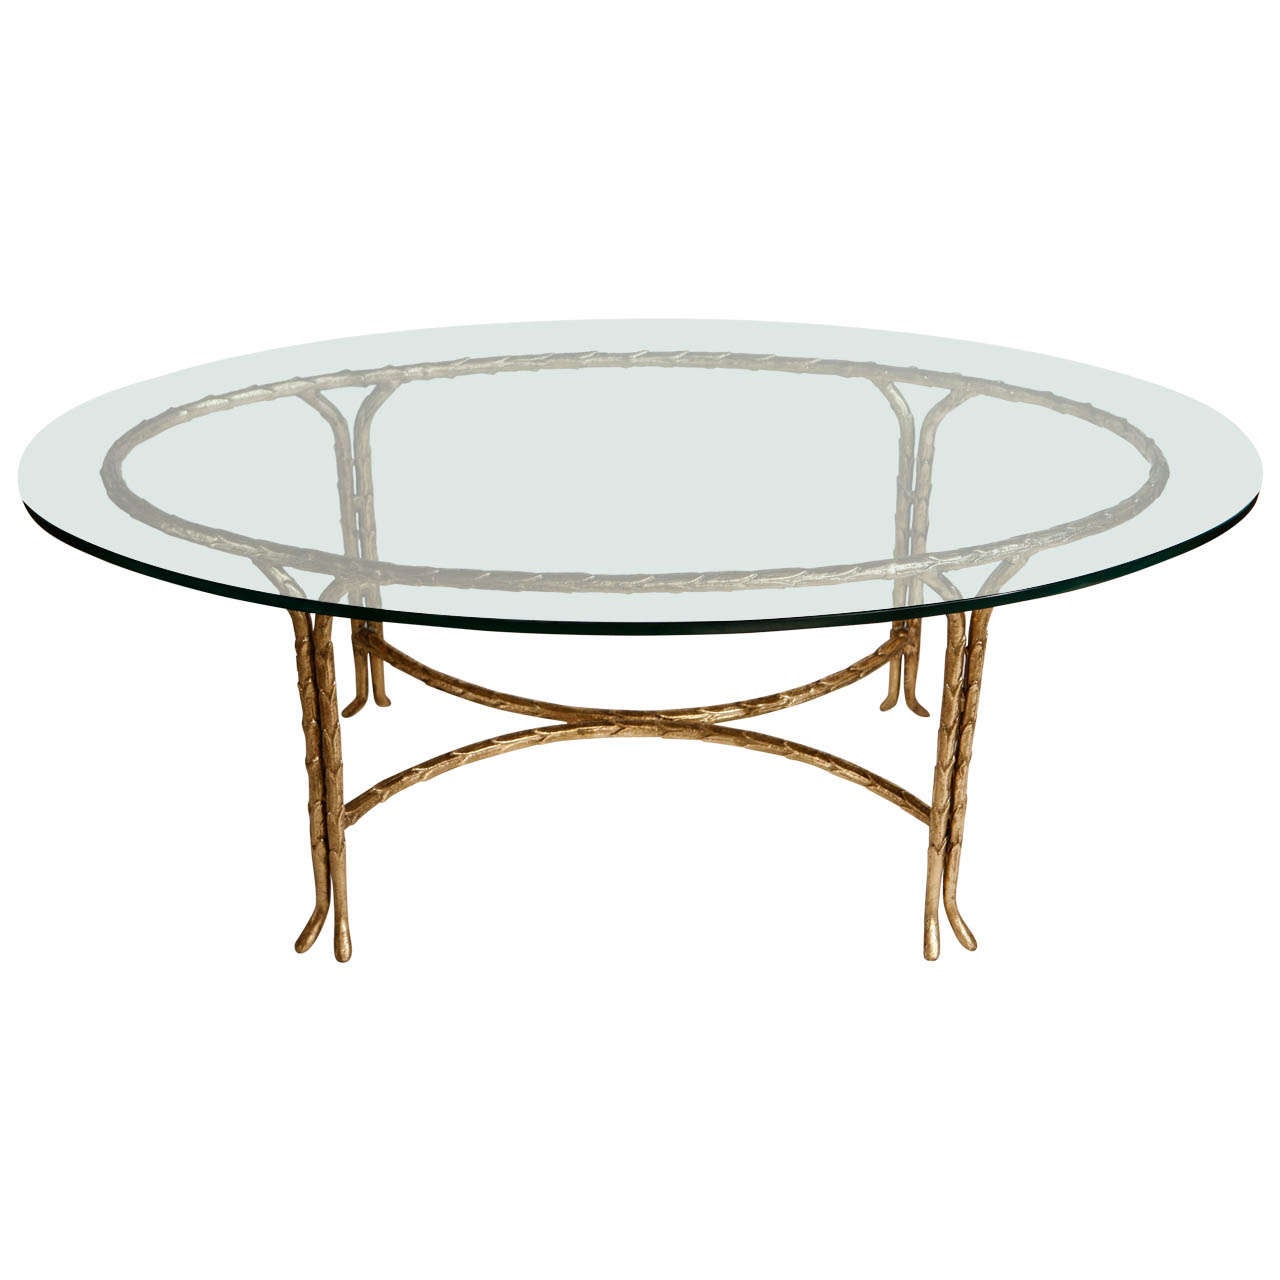 Gold Leafed Maison Bagues Oval Coffee Table